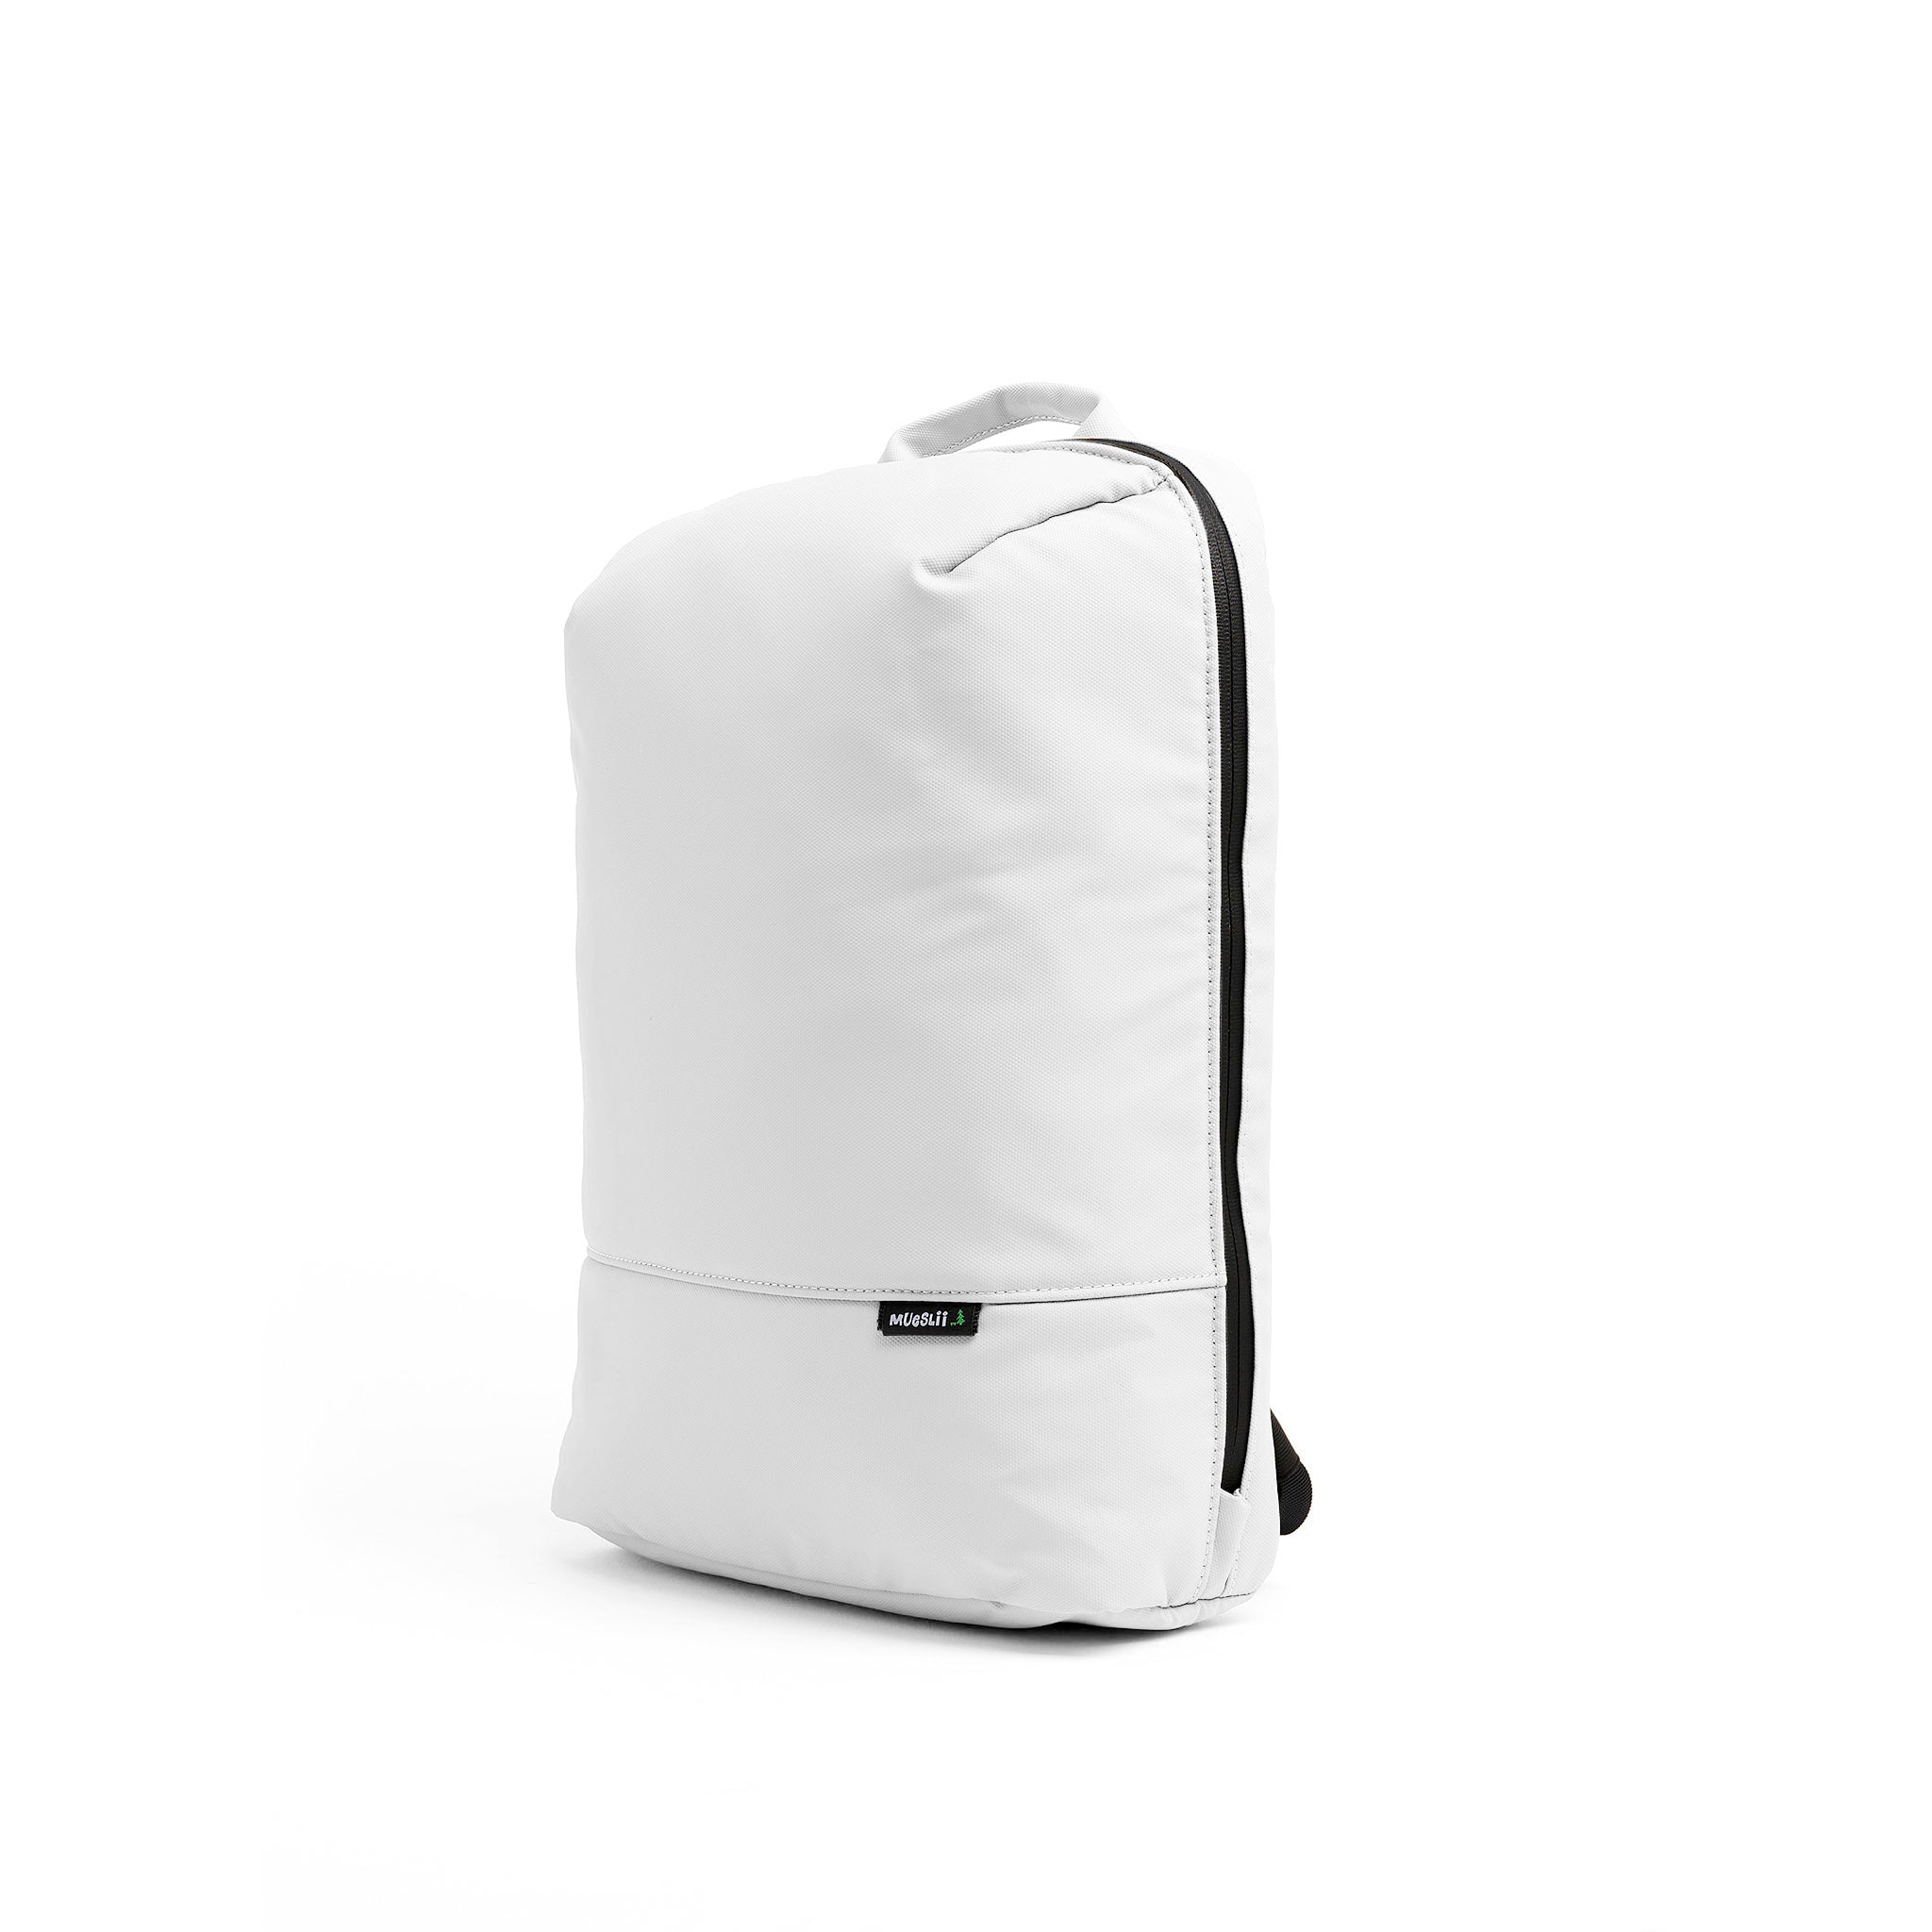 Mueslii daily backpack, made of PU coated waterproof nylon, with a laptop compartment, color white, side view.